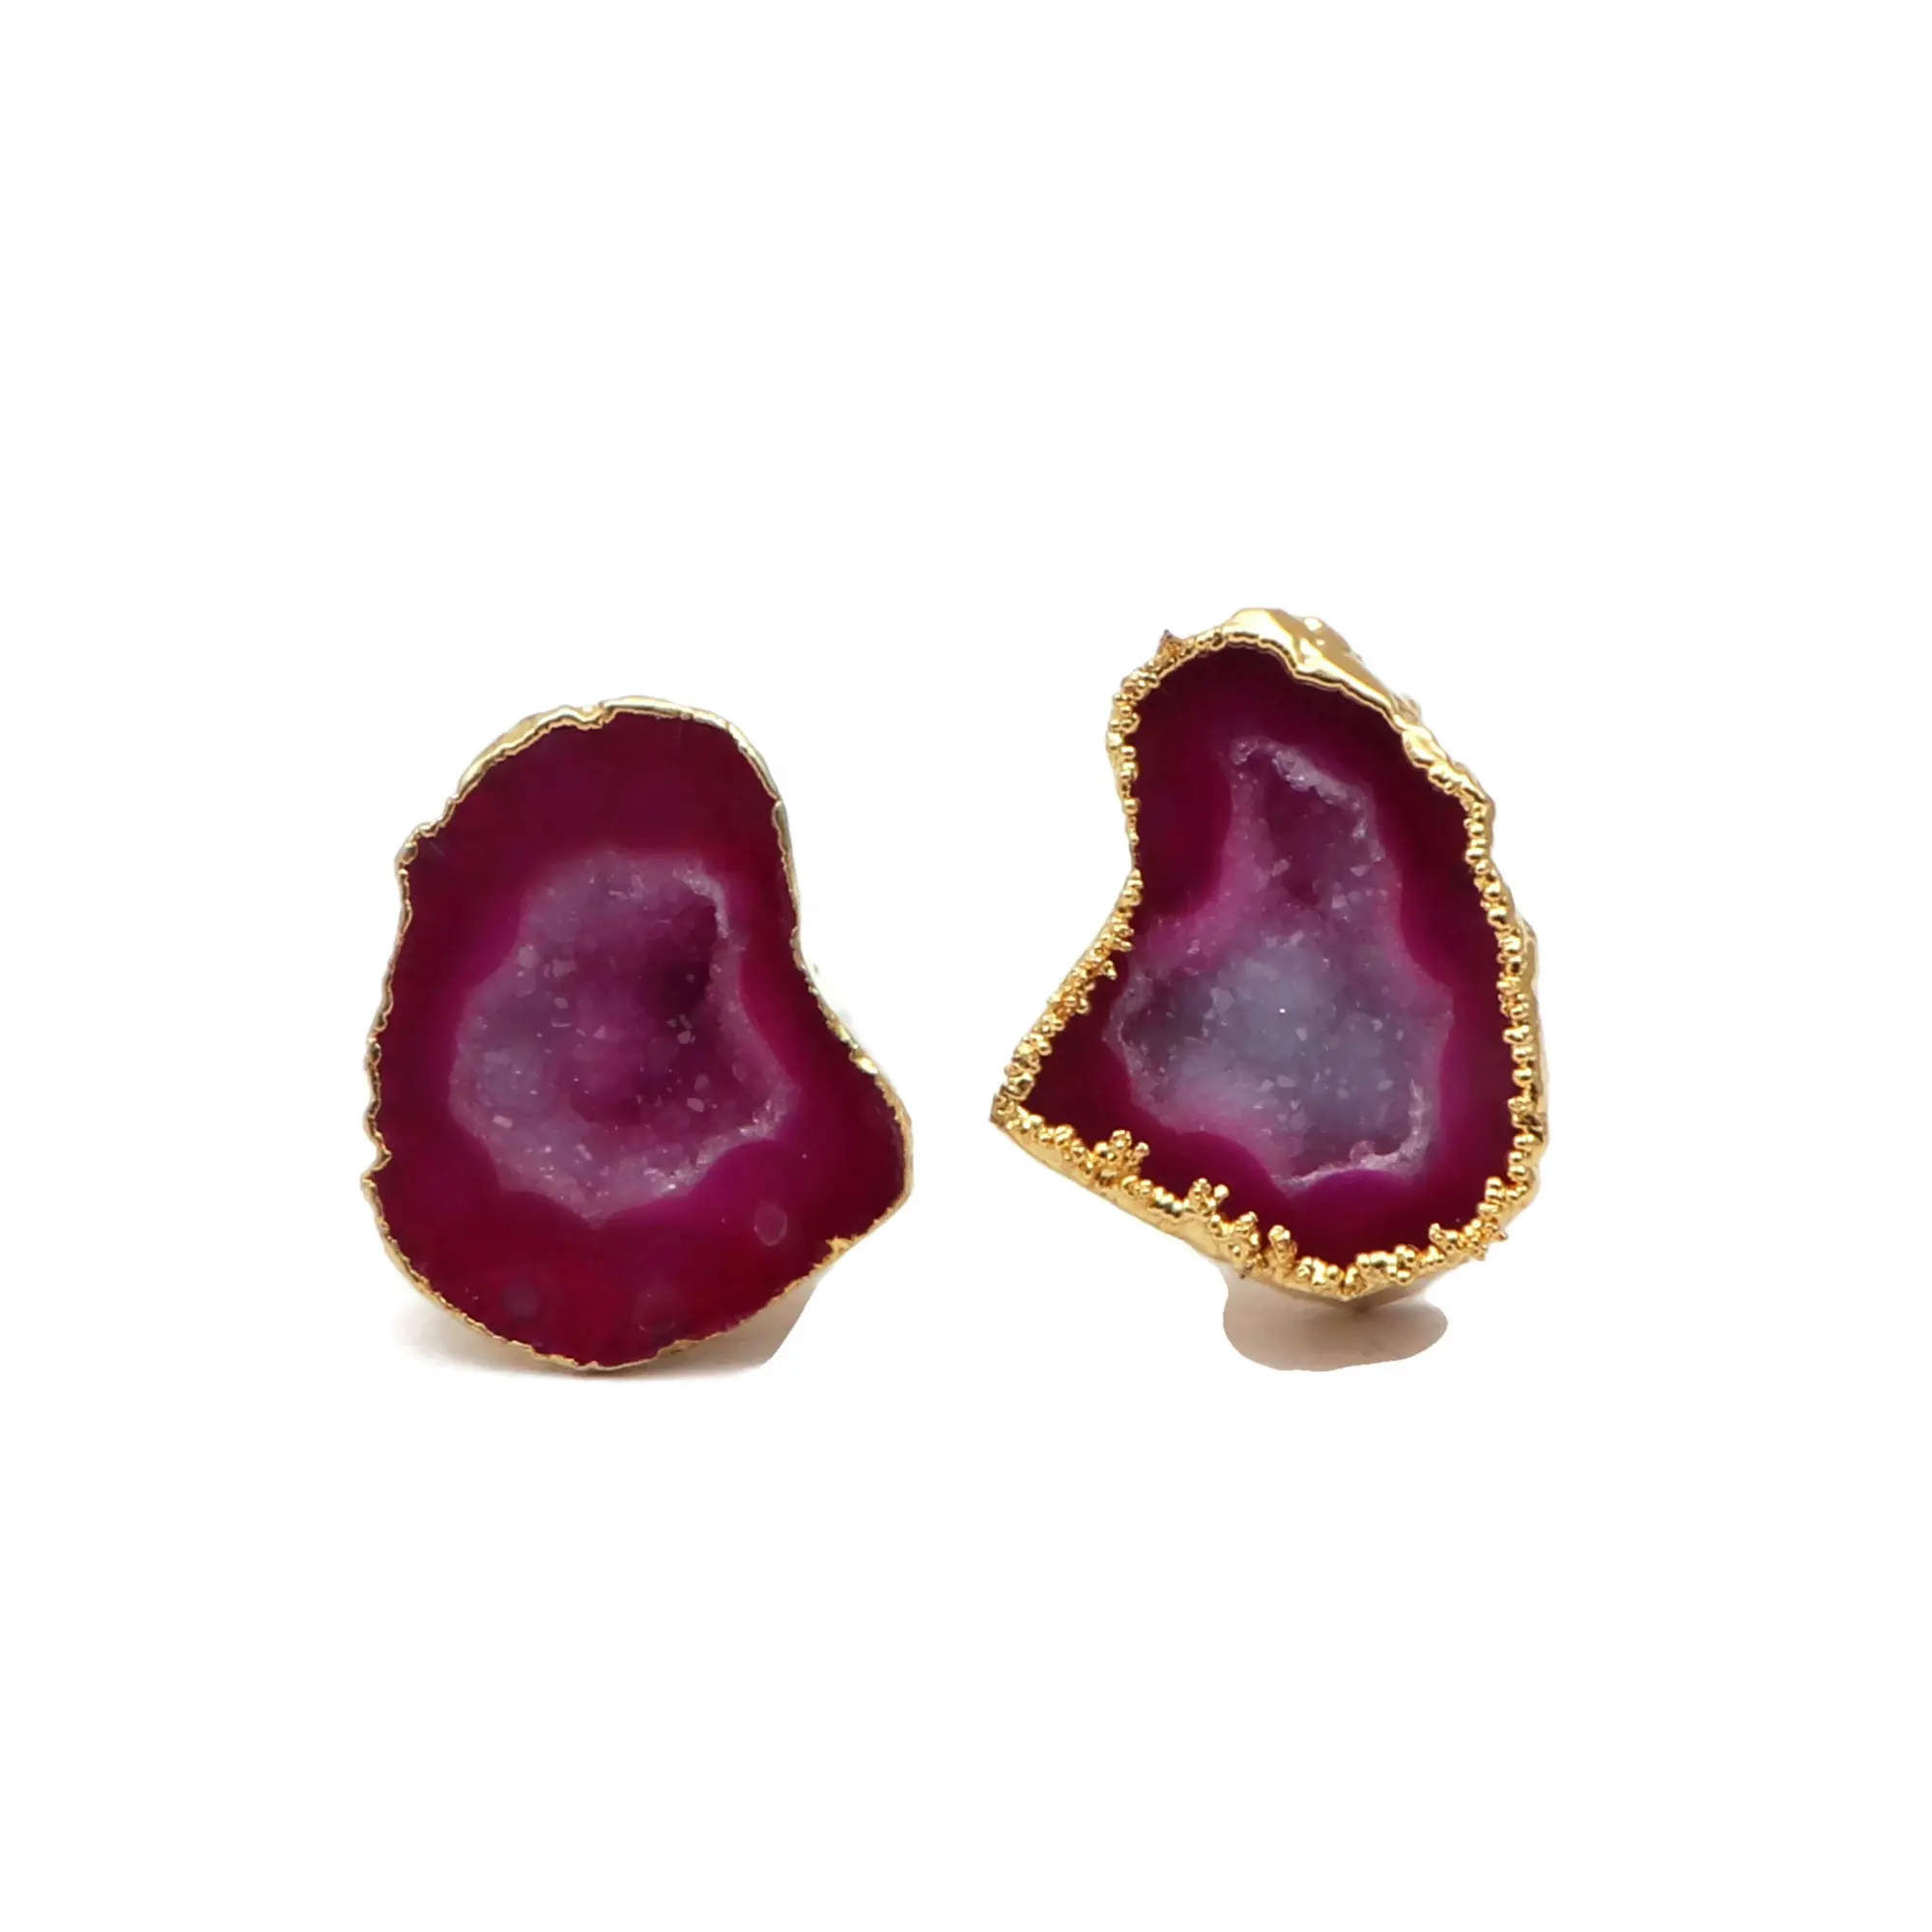 Sale Geode Druzy Gemstone push back earring Gold Electroplated Party Fashion Jewelry Tiny Stud Earring Pair gift for women girls